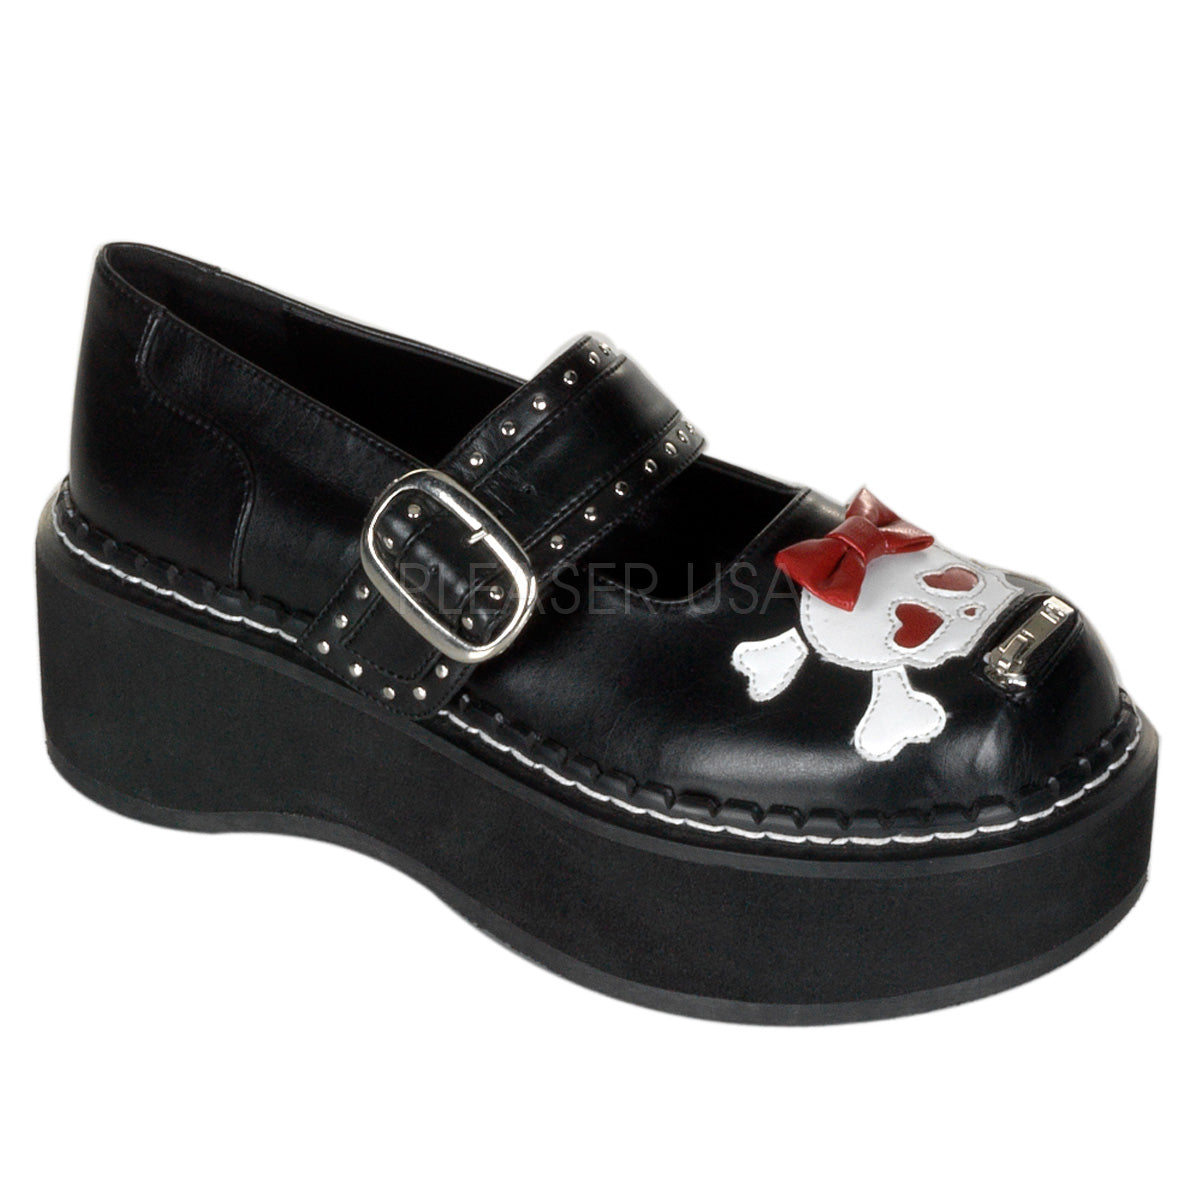 Emily 221- cute skull Mary Jane shoe – Quirky Stylin